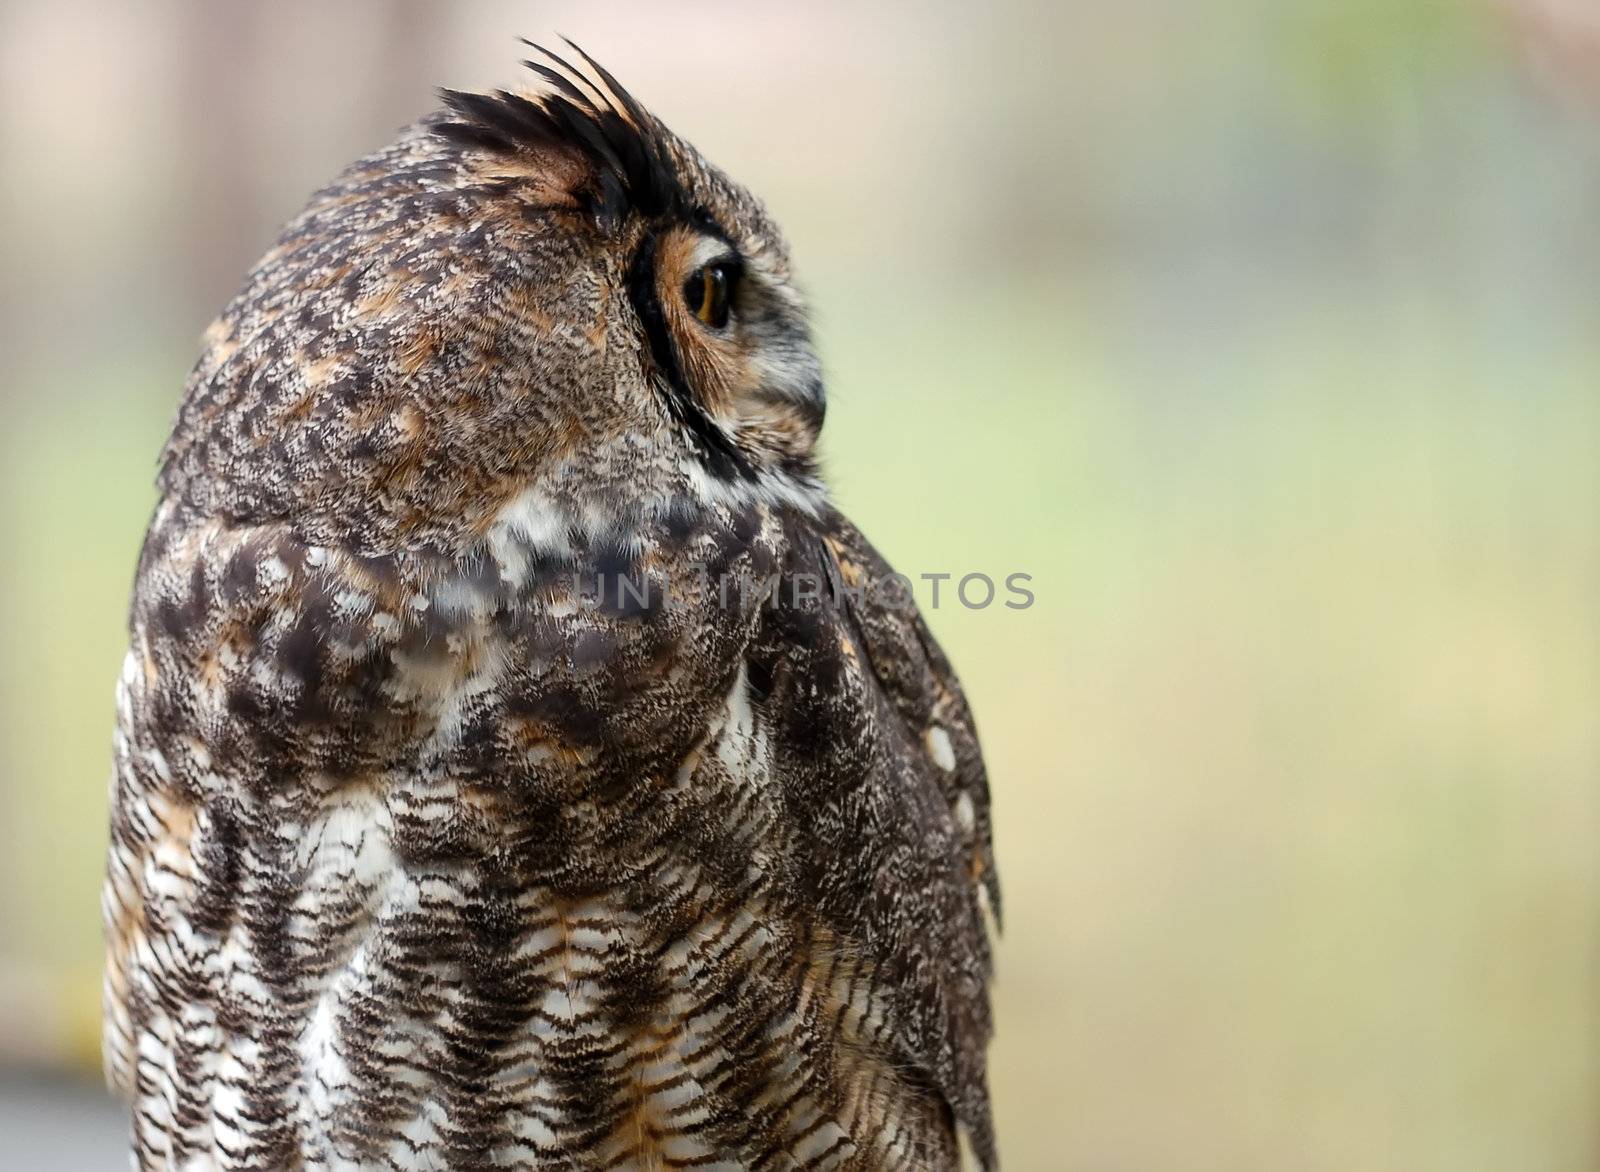 Spotted Eagle Owl (Bubo africanus) by nialat